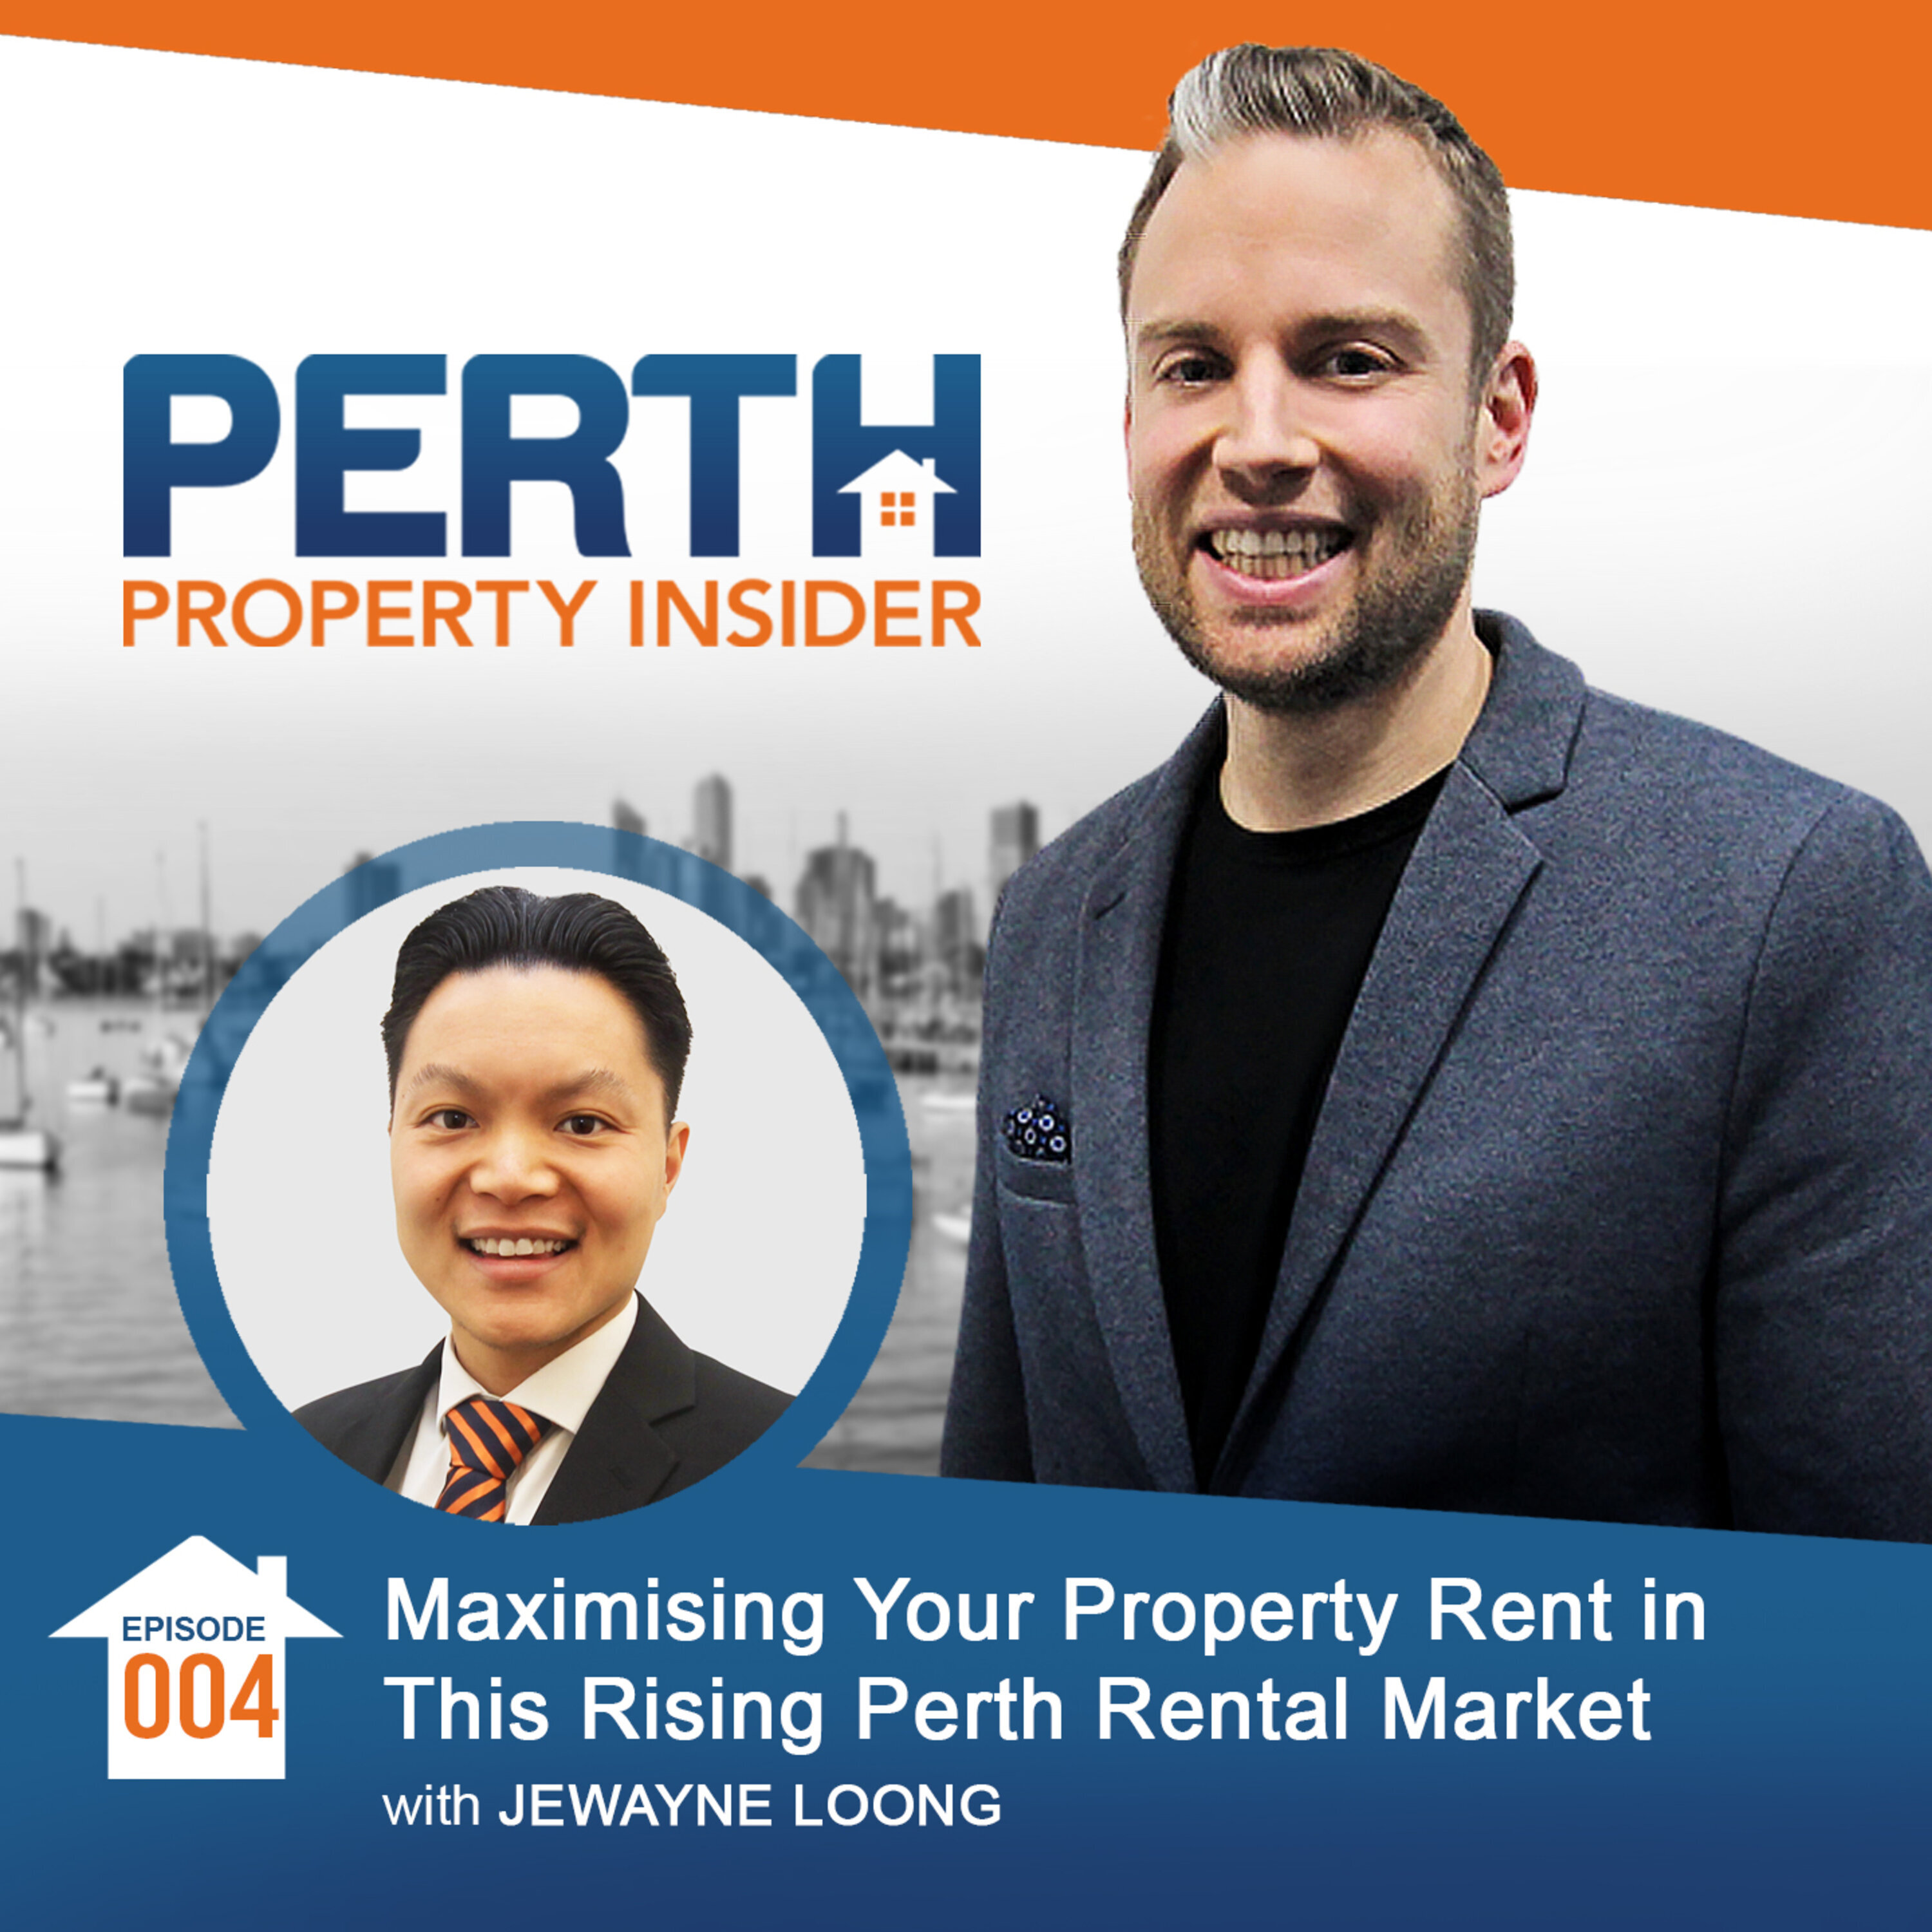 Maximising Your Property Rent in This Rising Perth Rental Market with Jewayne Loong